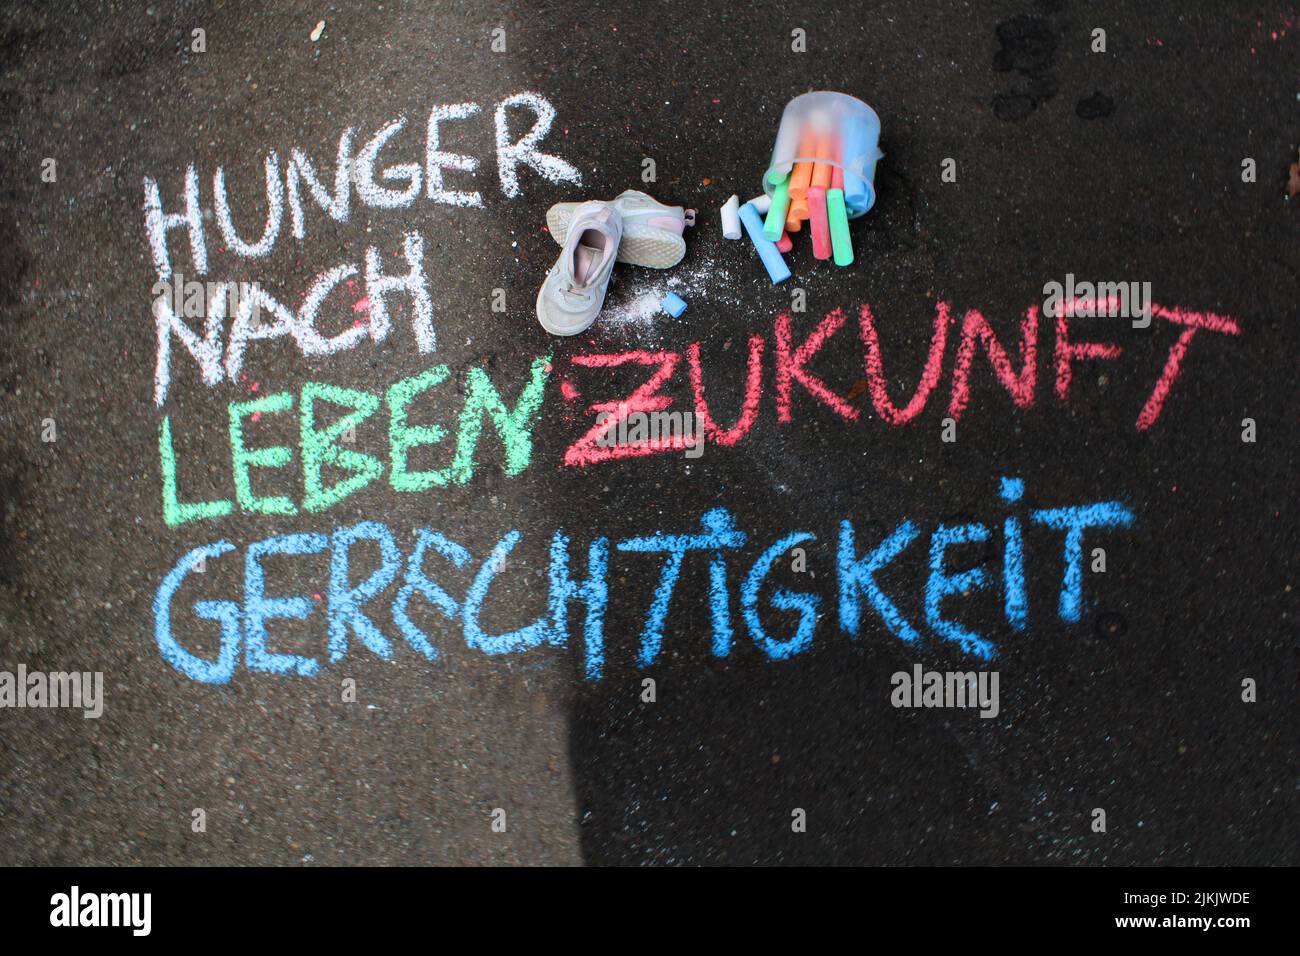 A colorful German text on the asphalt - Hunger for life, future and justice Stock Photo